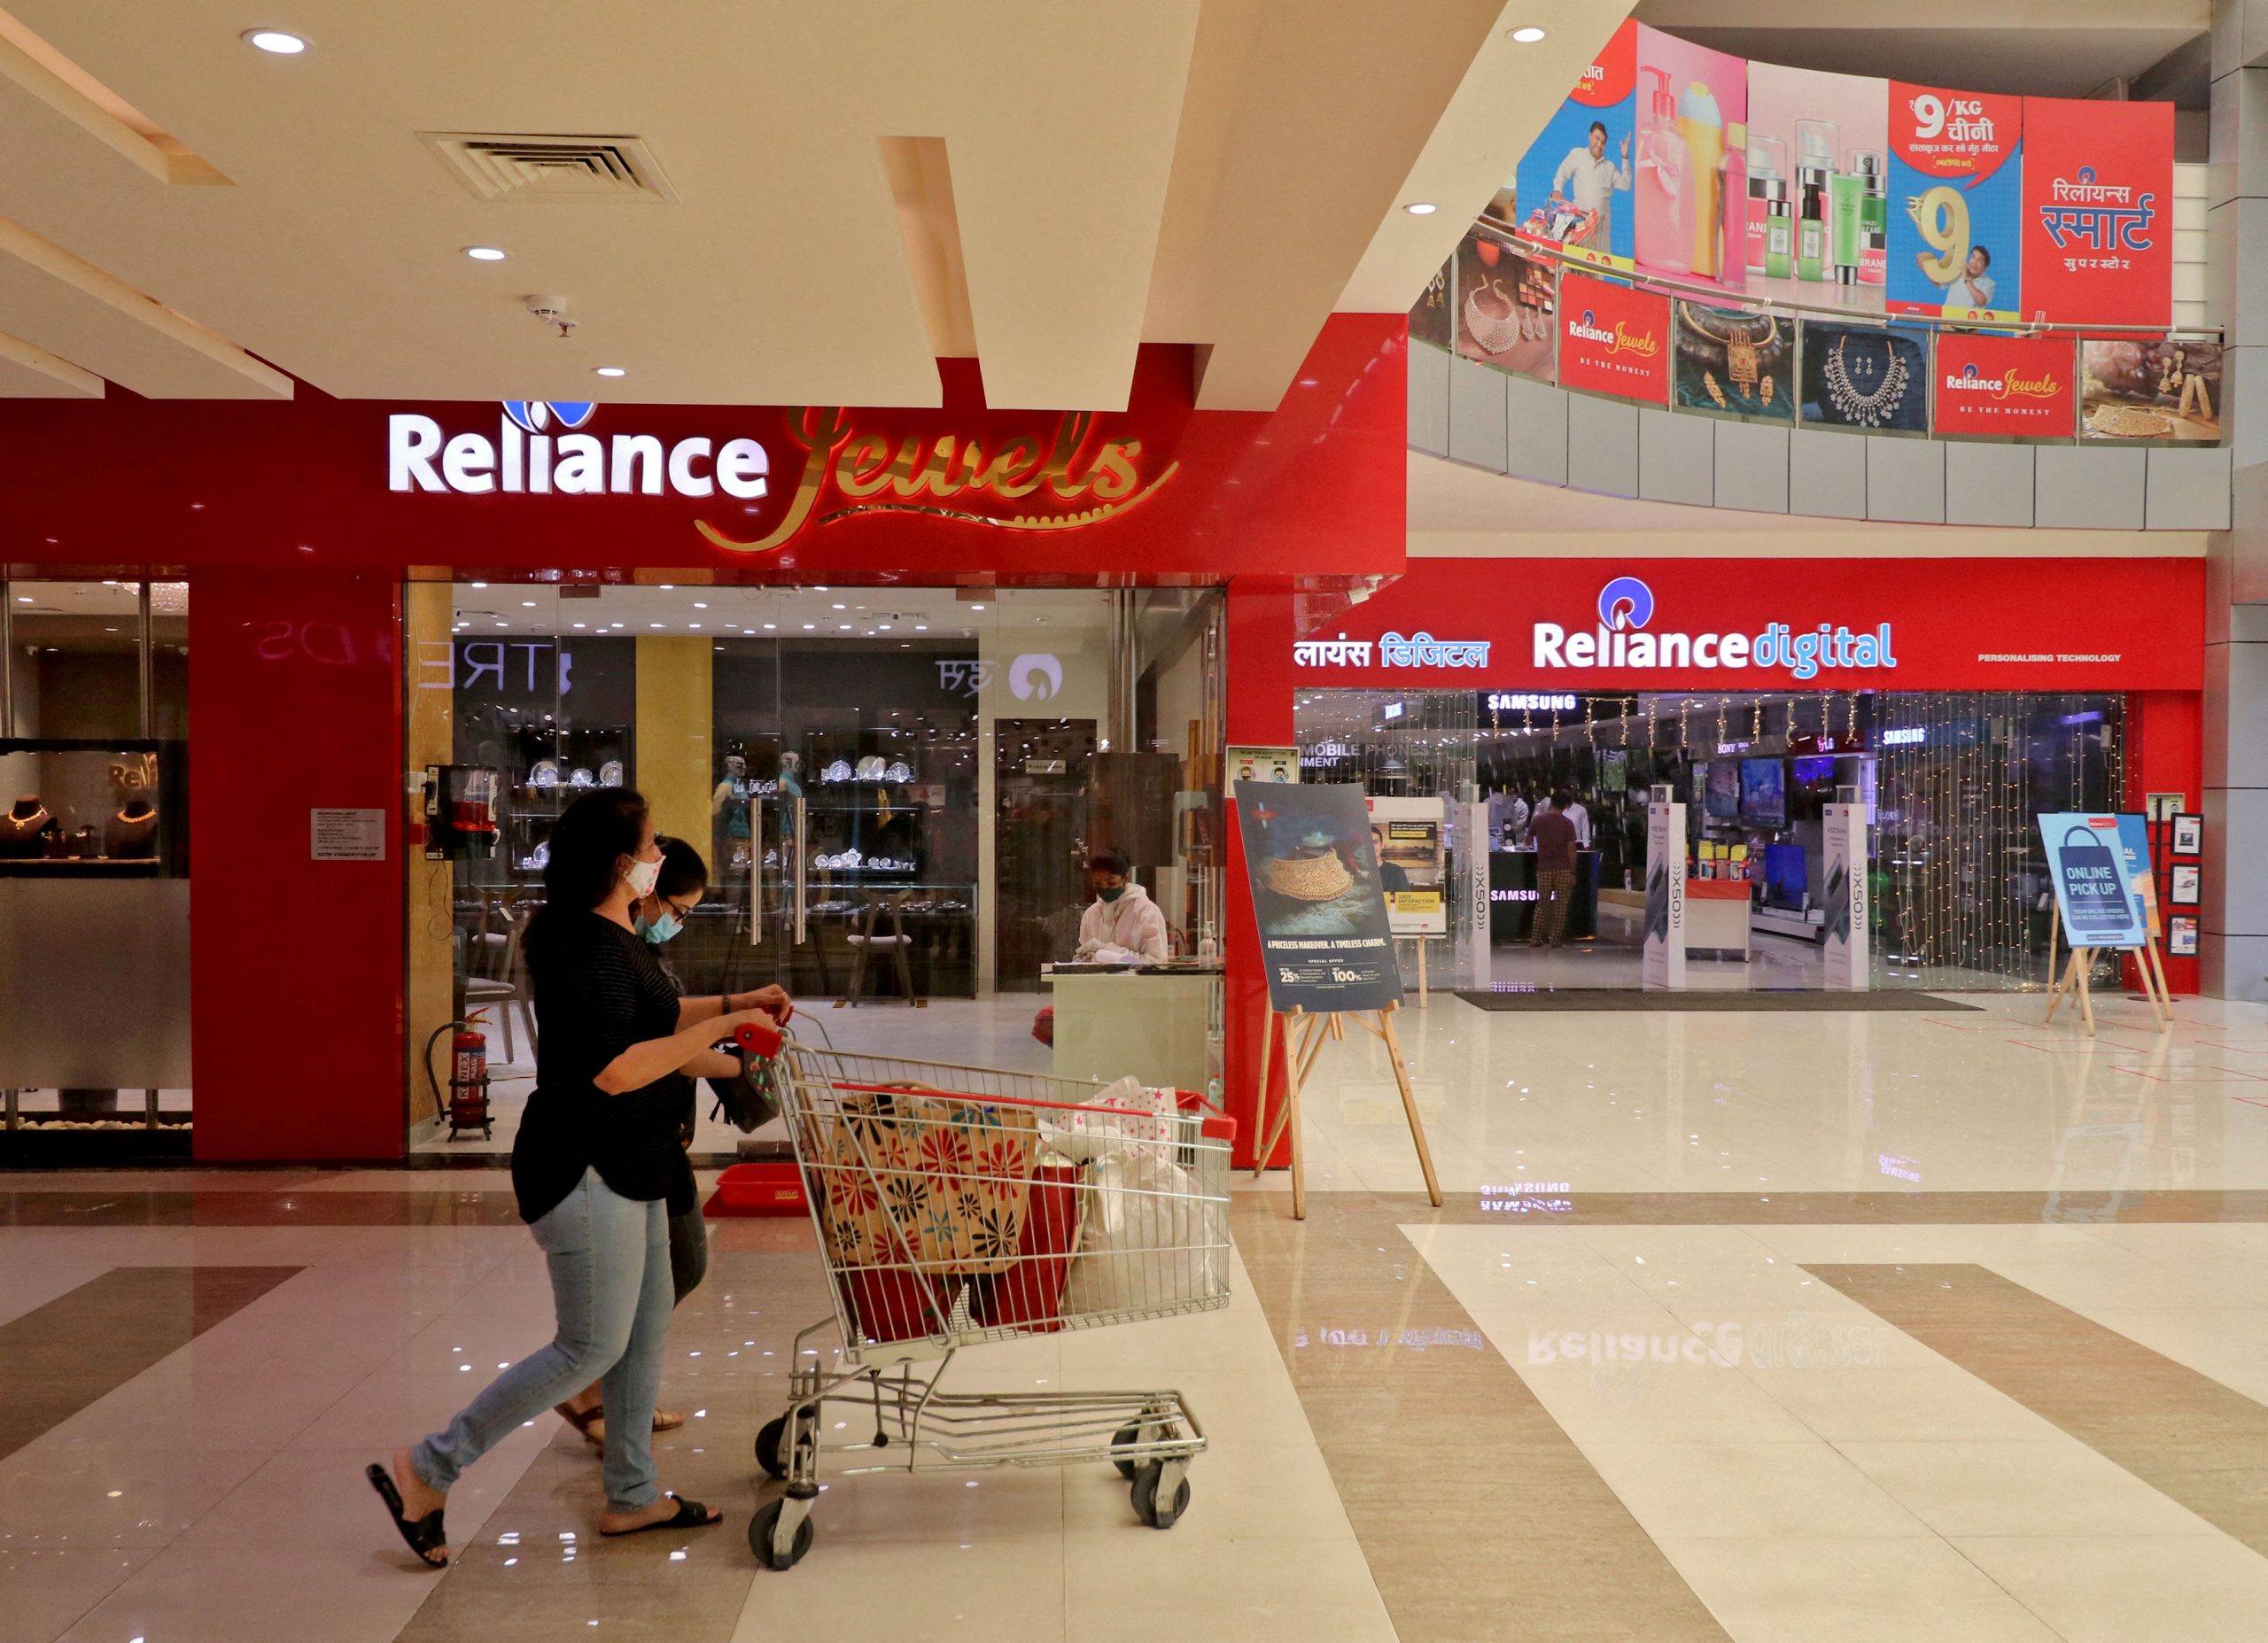 Qatar Pours $1 Billion into Indian Retail: A Game-Changing Investment